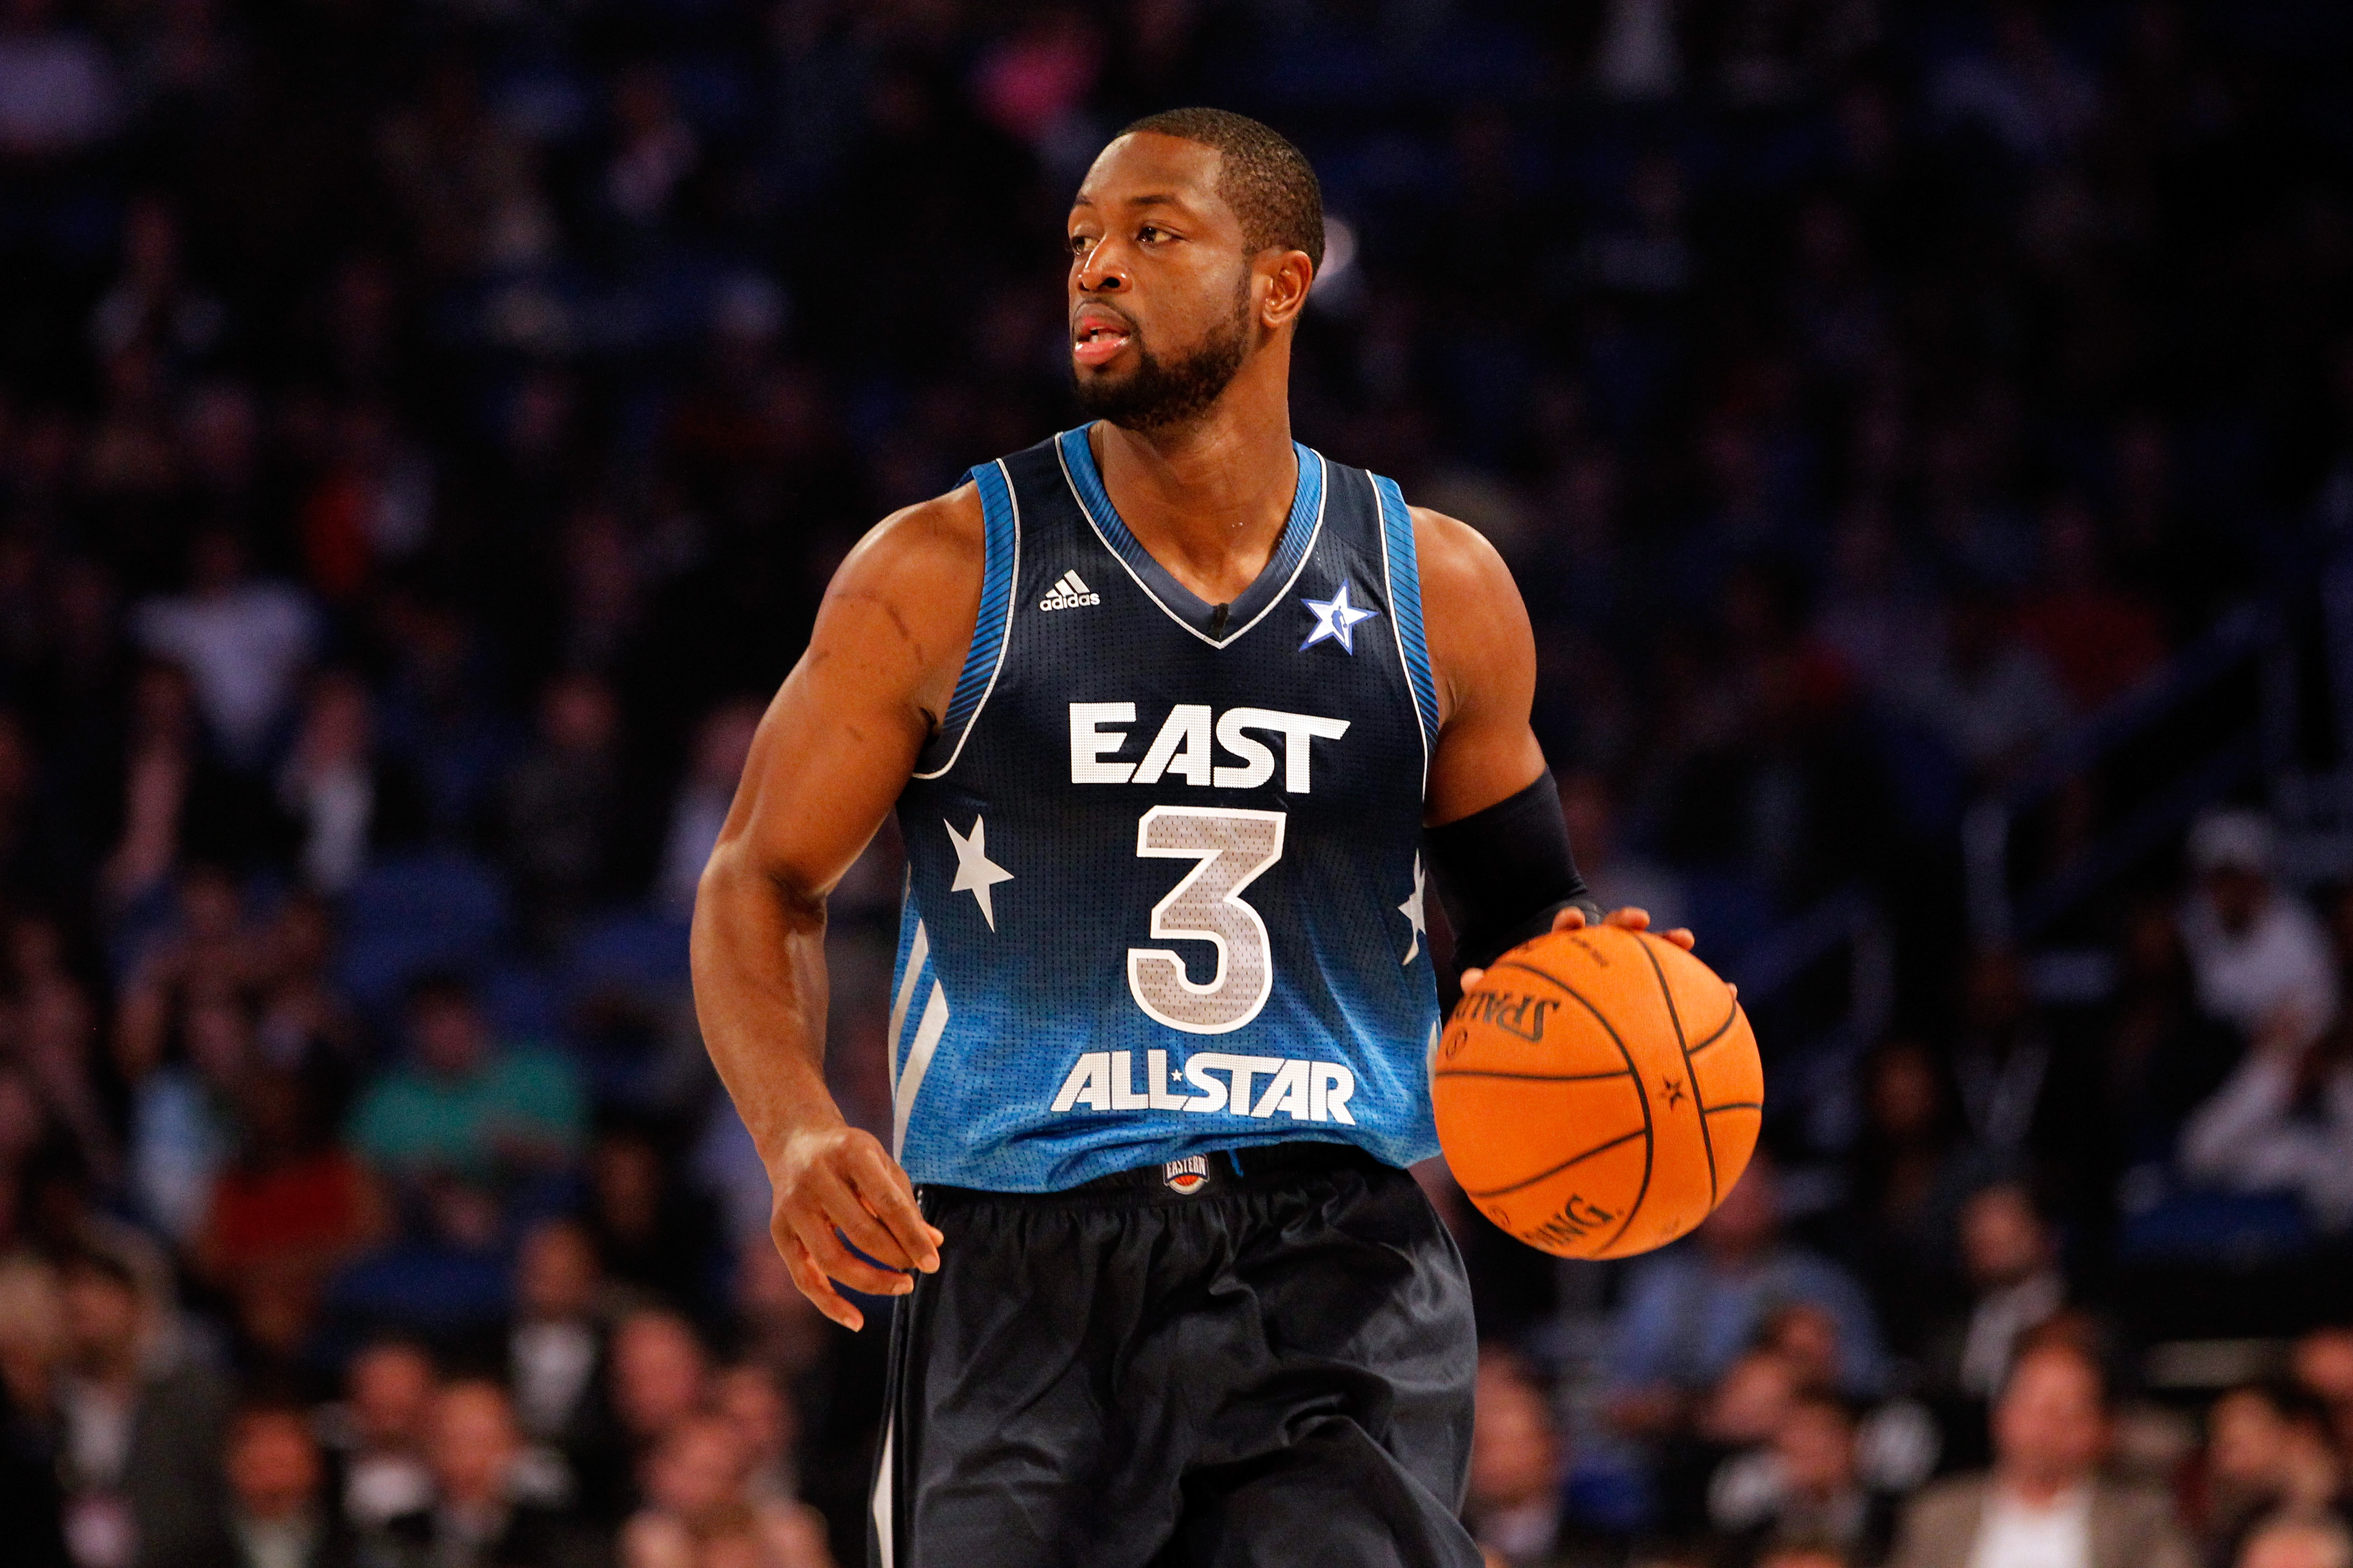 d wade all star